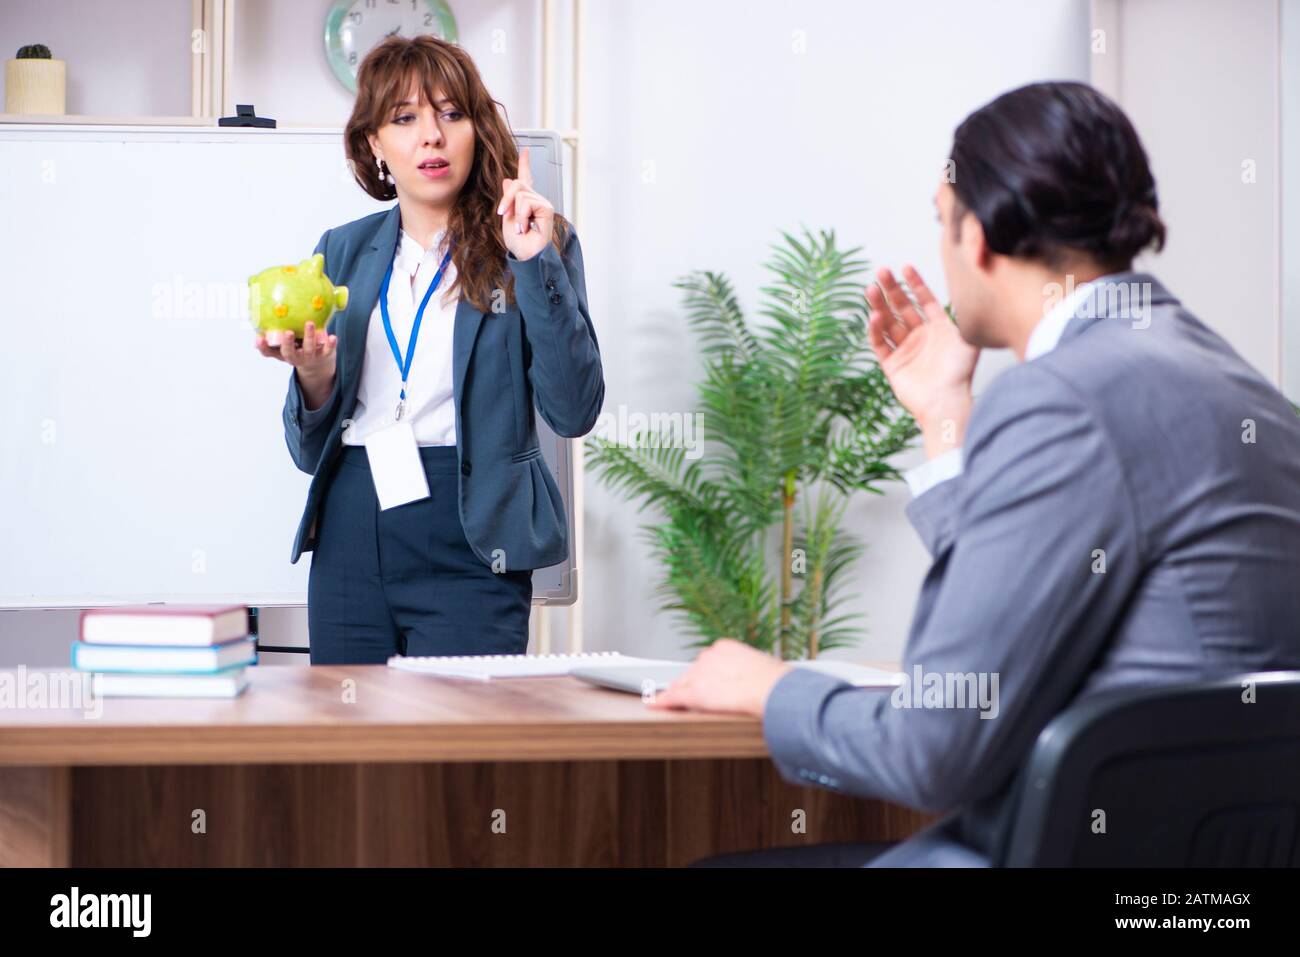 The man and woman in business meeting concept Stock Photo